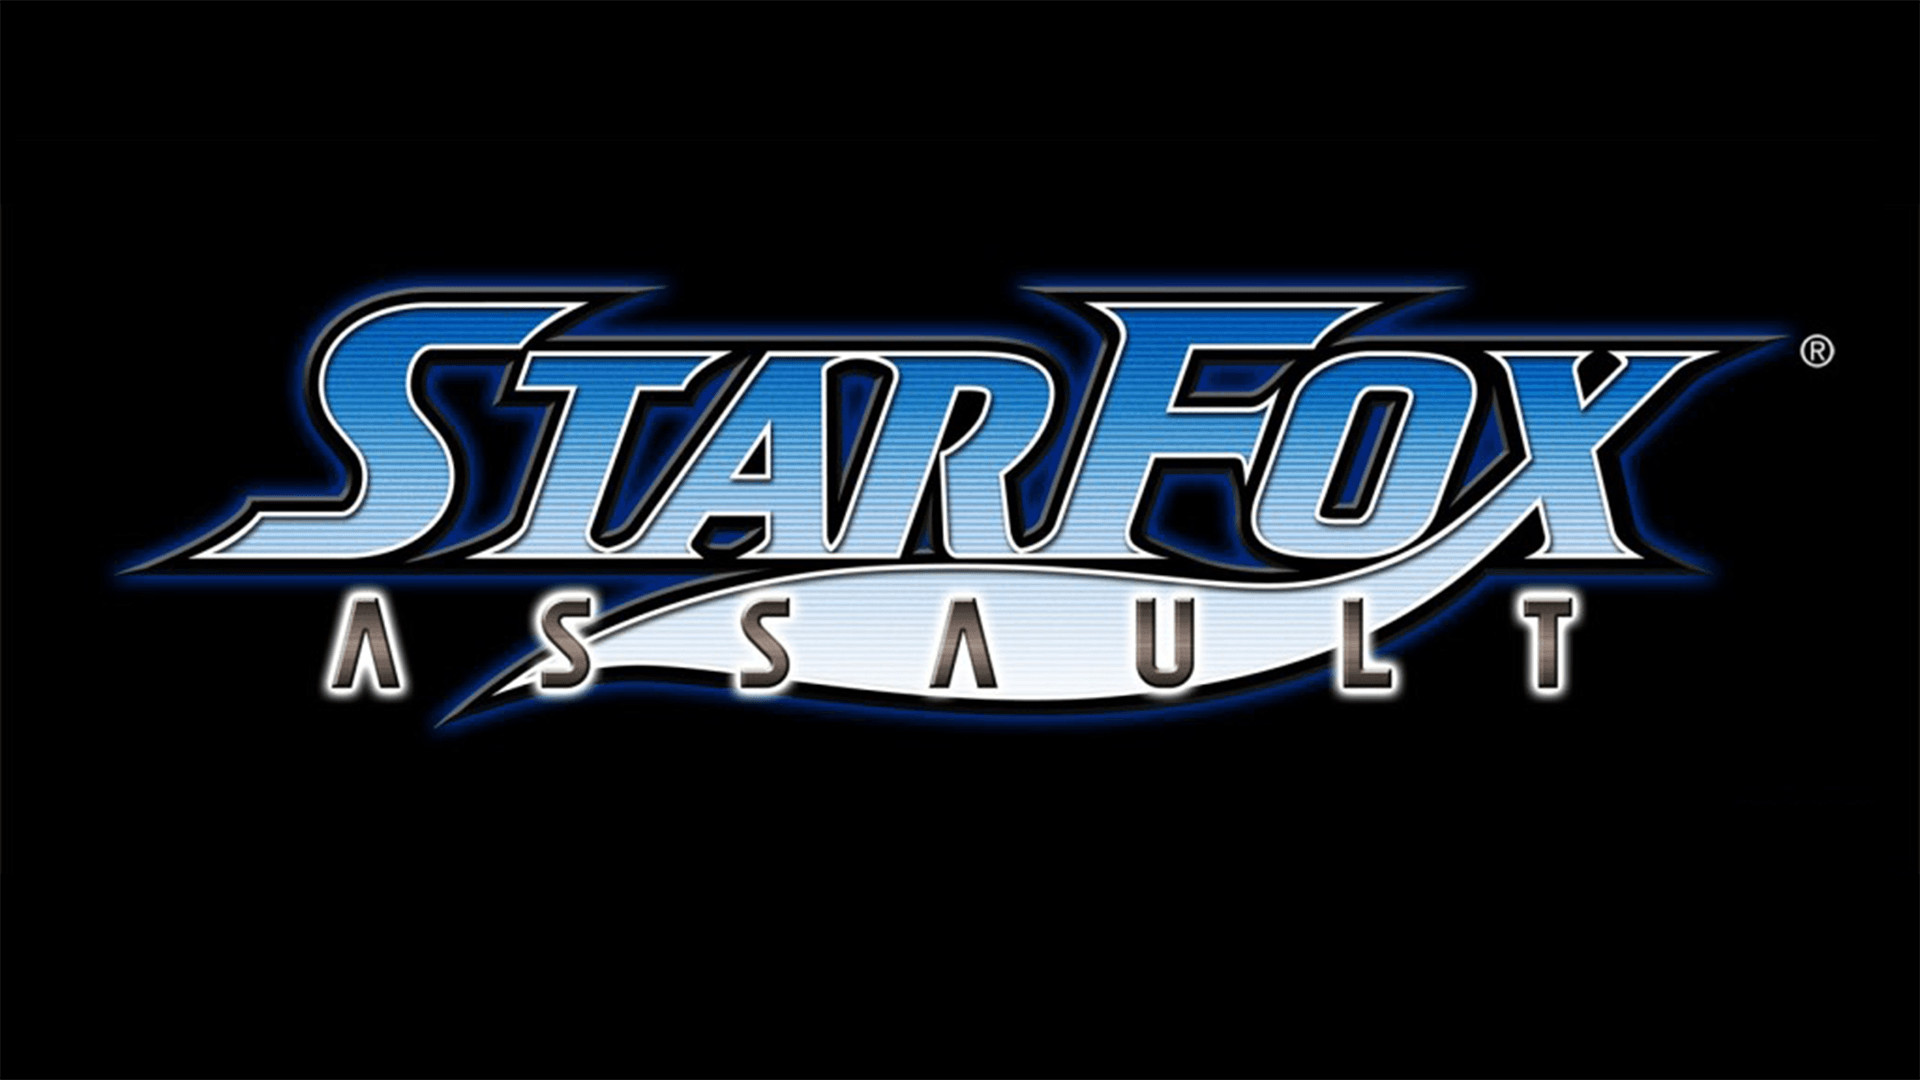 Star Fox images Wolf collage HD wallpaper and background photos .